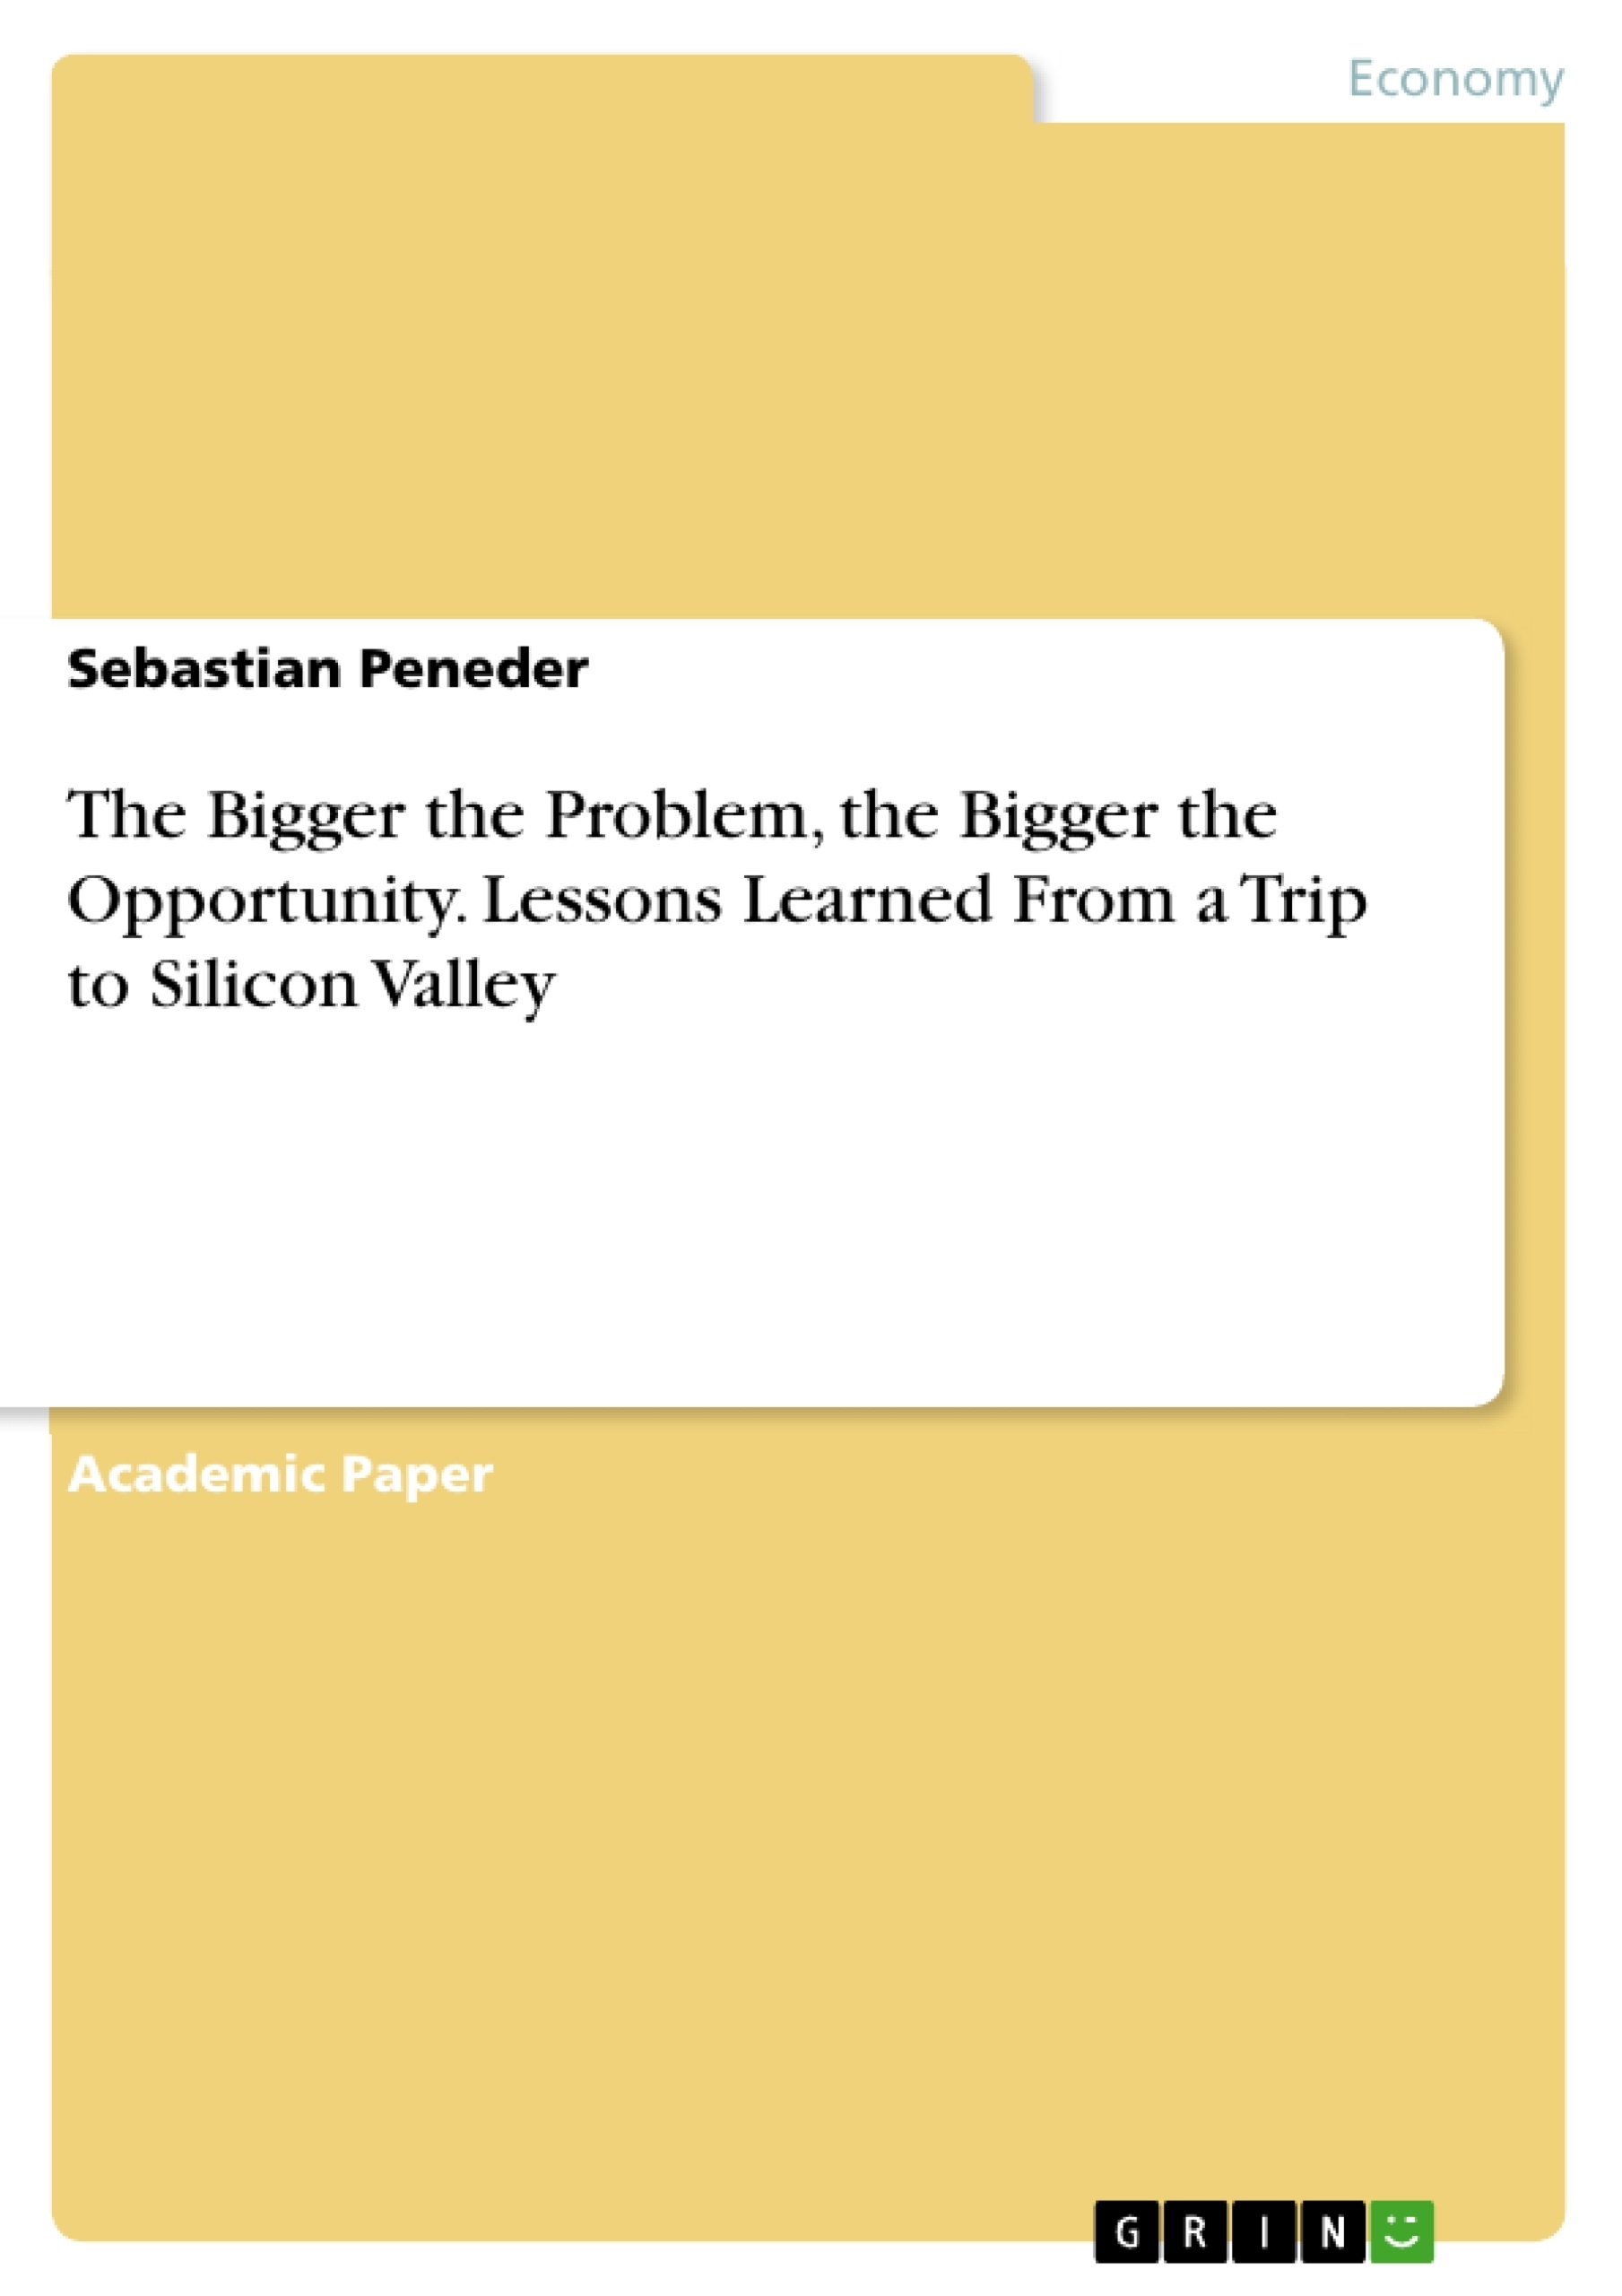 Title: The Bigger the Problem, the Bigger the Opportunity. Lessons Learned From a Trip to Silicon Valley